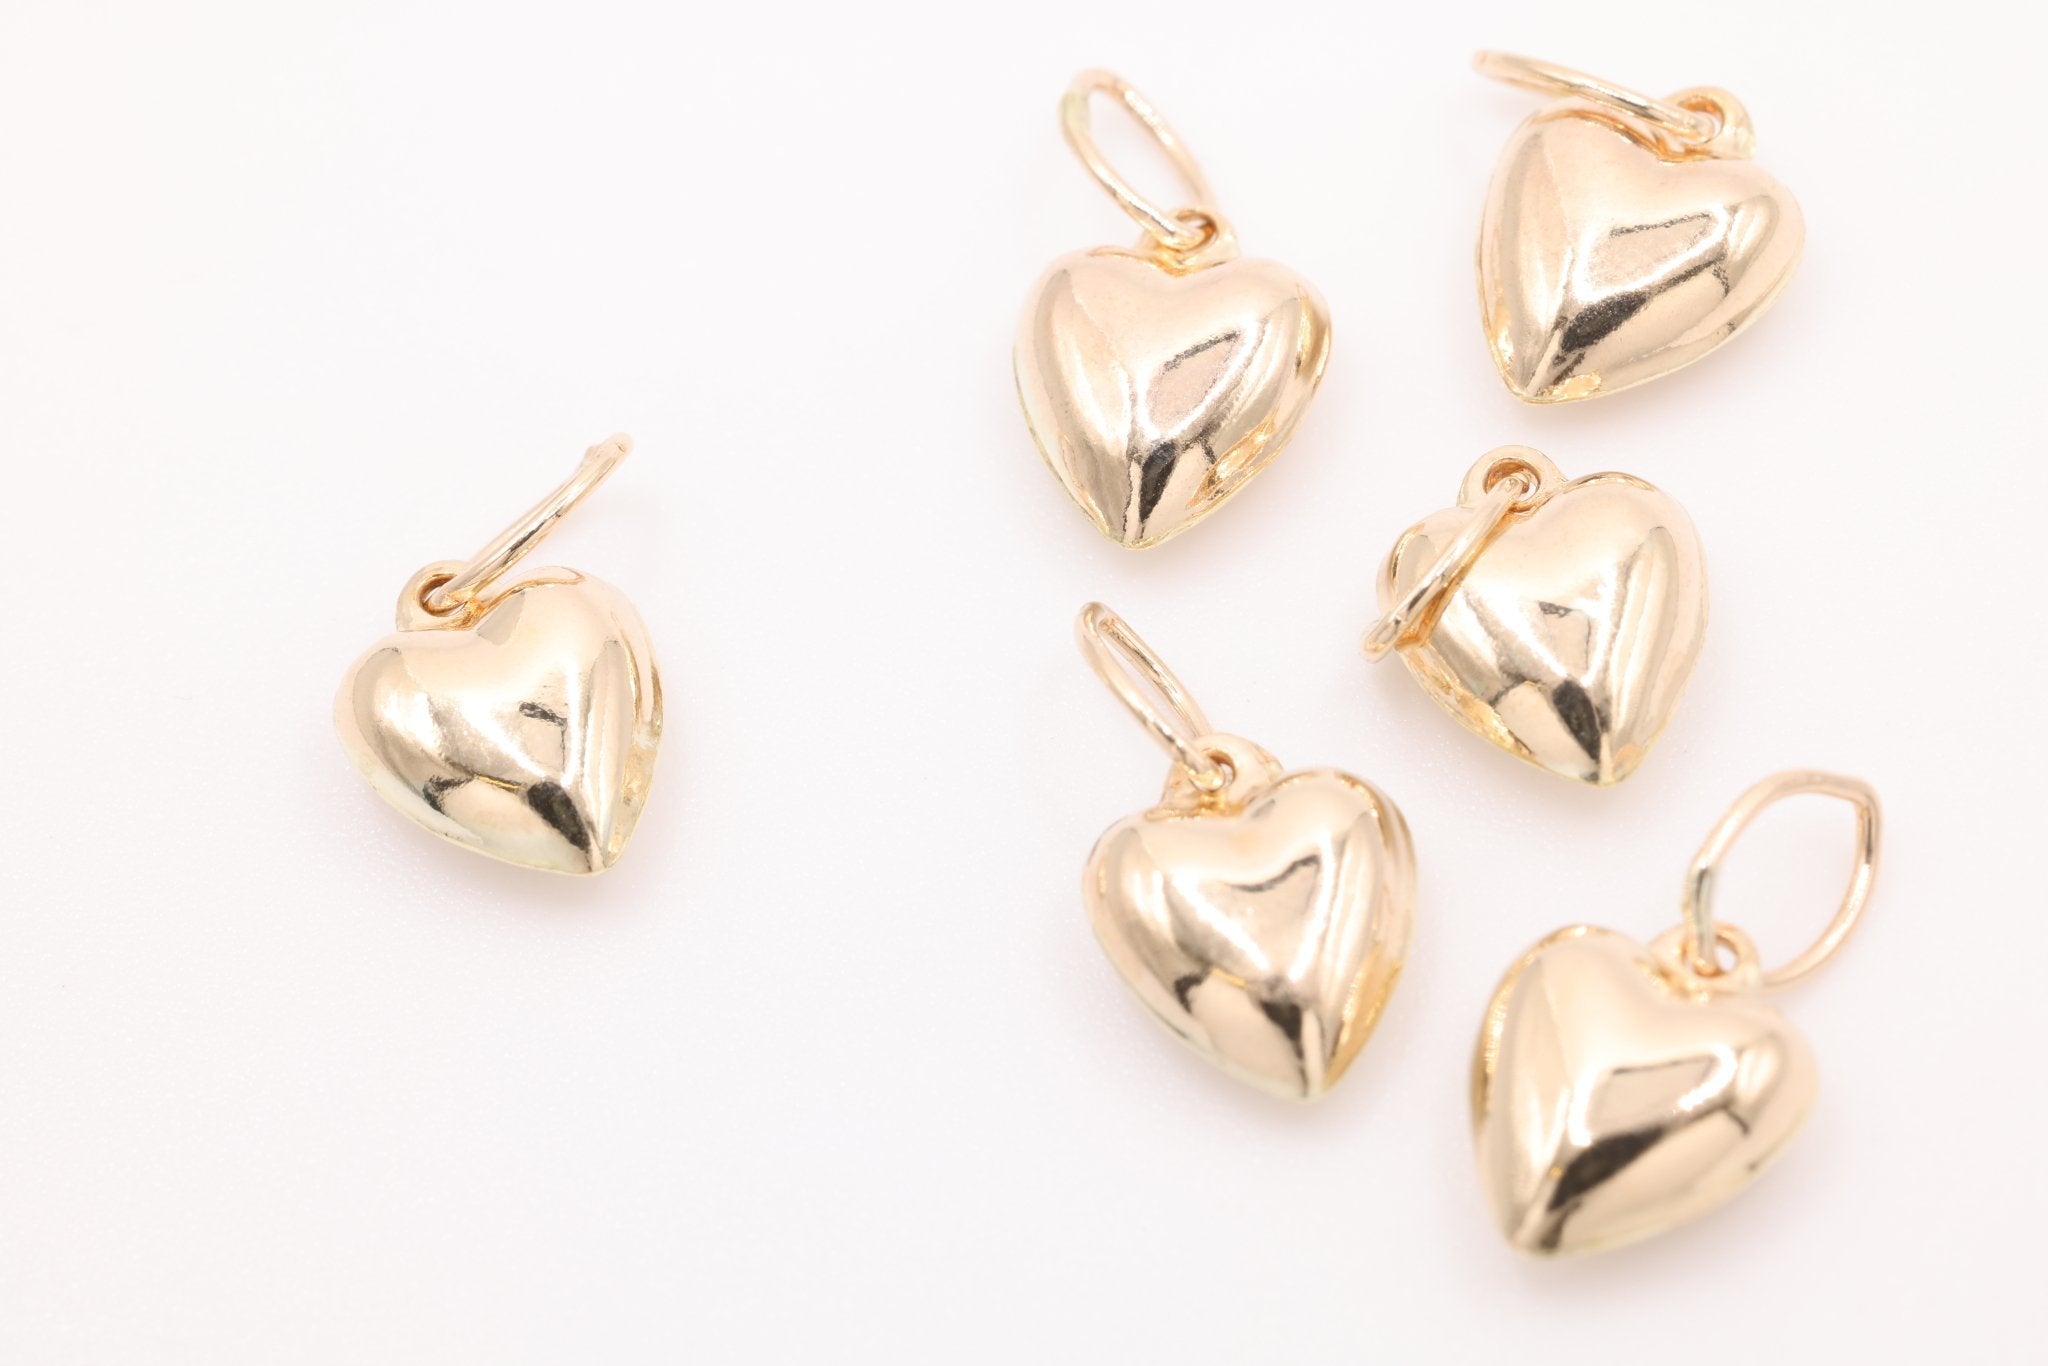 Gold Puffy Heart Charm, 14K Gold-Filled, Small 3D Heart Charm, Jewelry Making Charm - HarperCrown